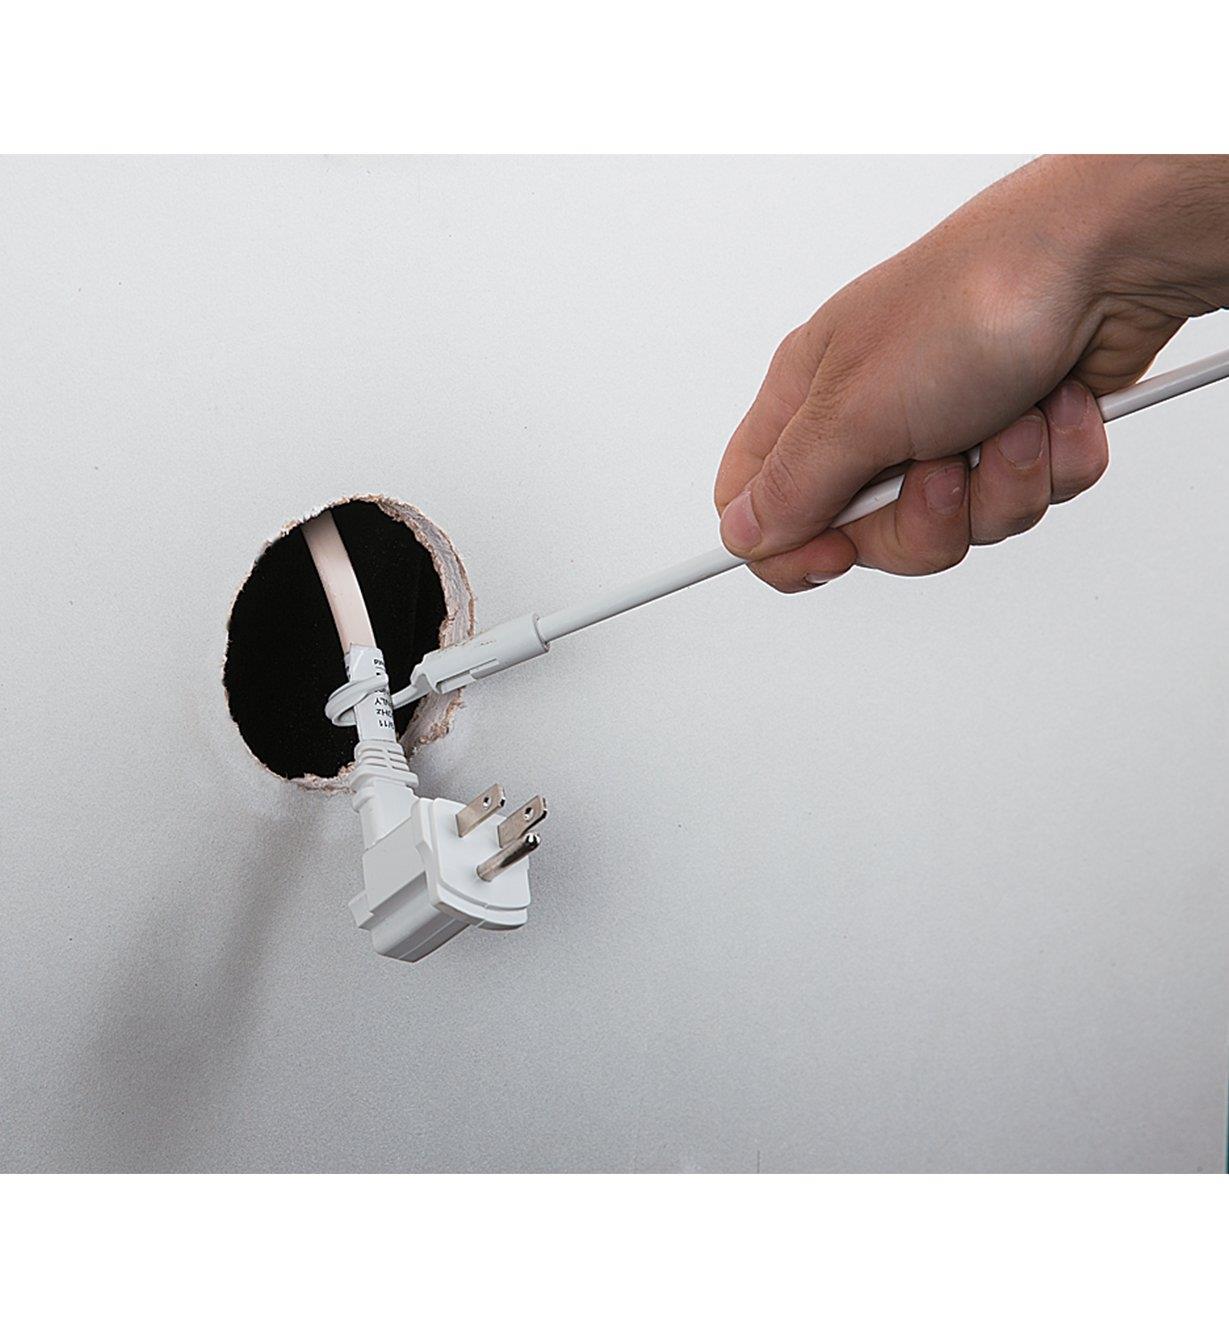 Using the hook to pull the plug end of the cord through the hole in the wall